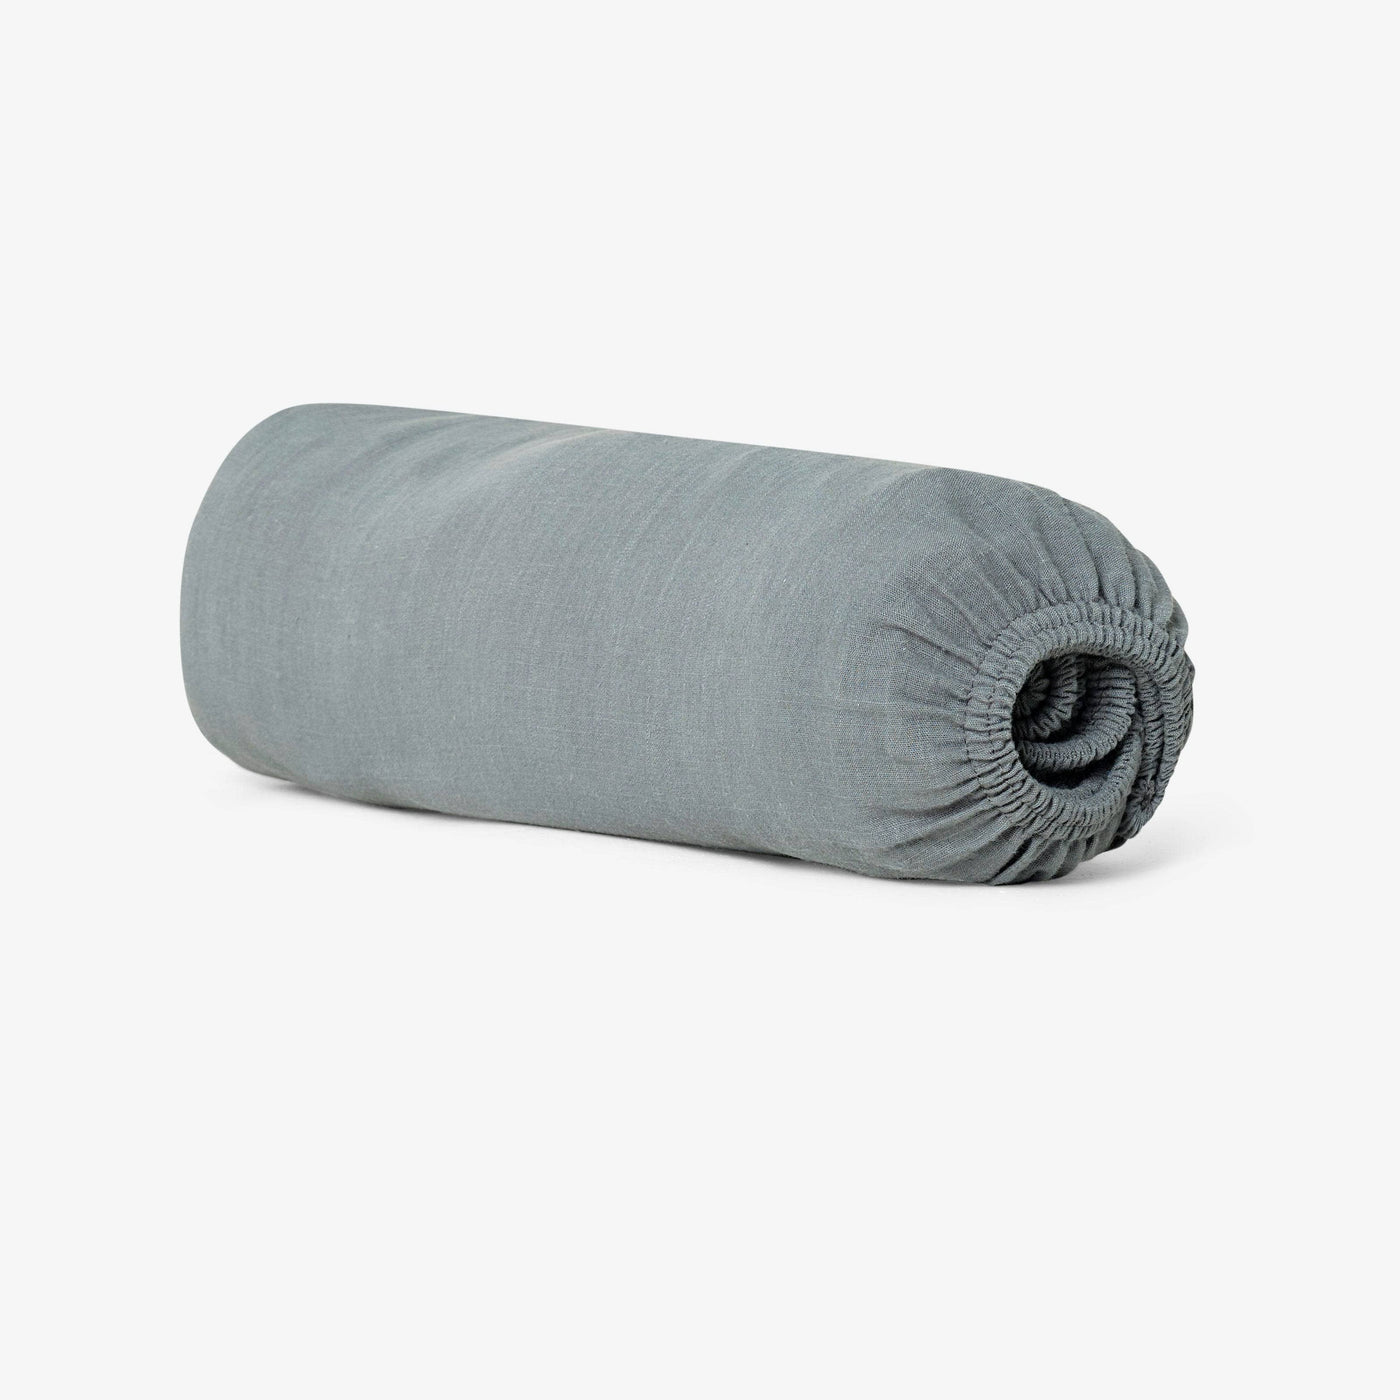 Ruby 100% Turkish Cotton Fitted Sheet, Anthracite Grey, King Size Bed Sheets sazy.com